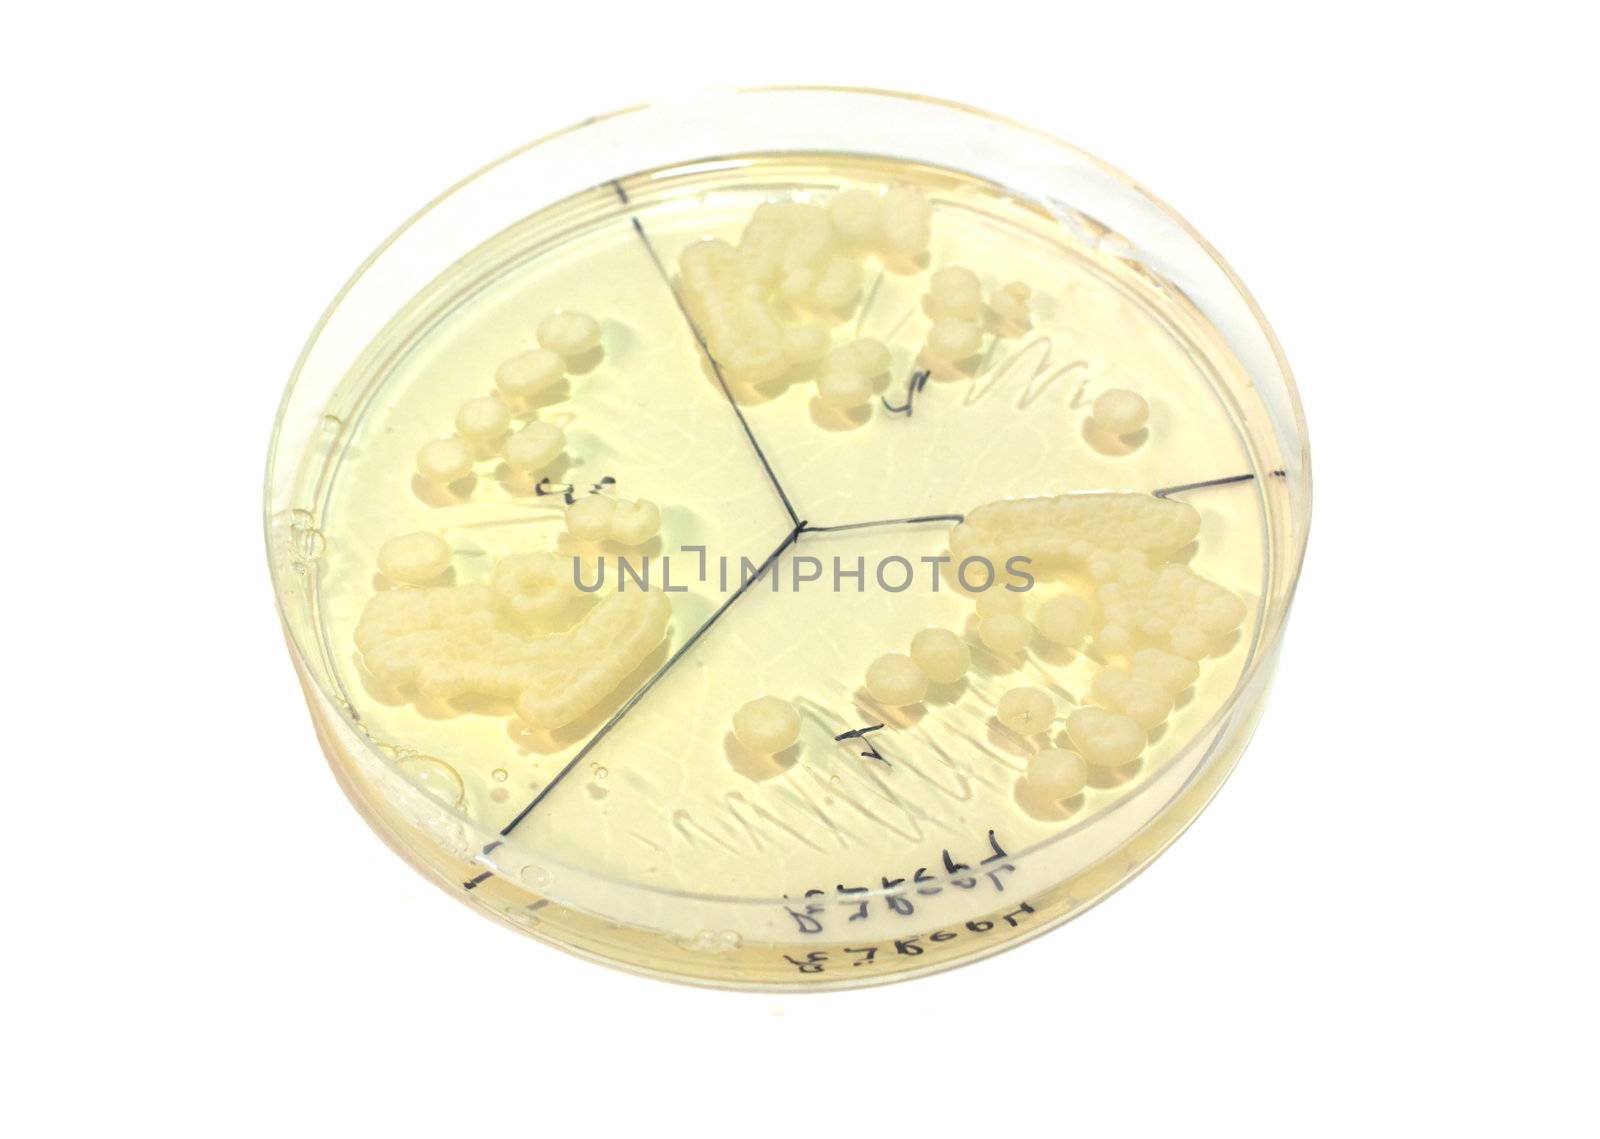 microbiological plate whith white colonies of fungi isolated on white